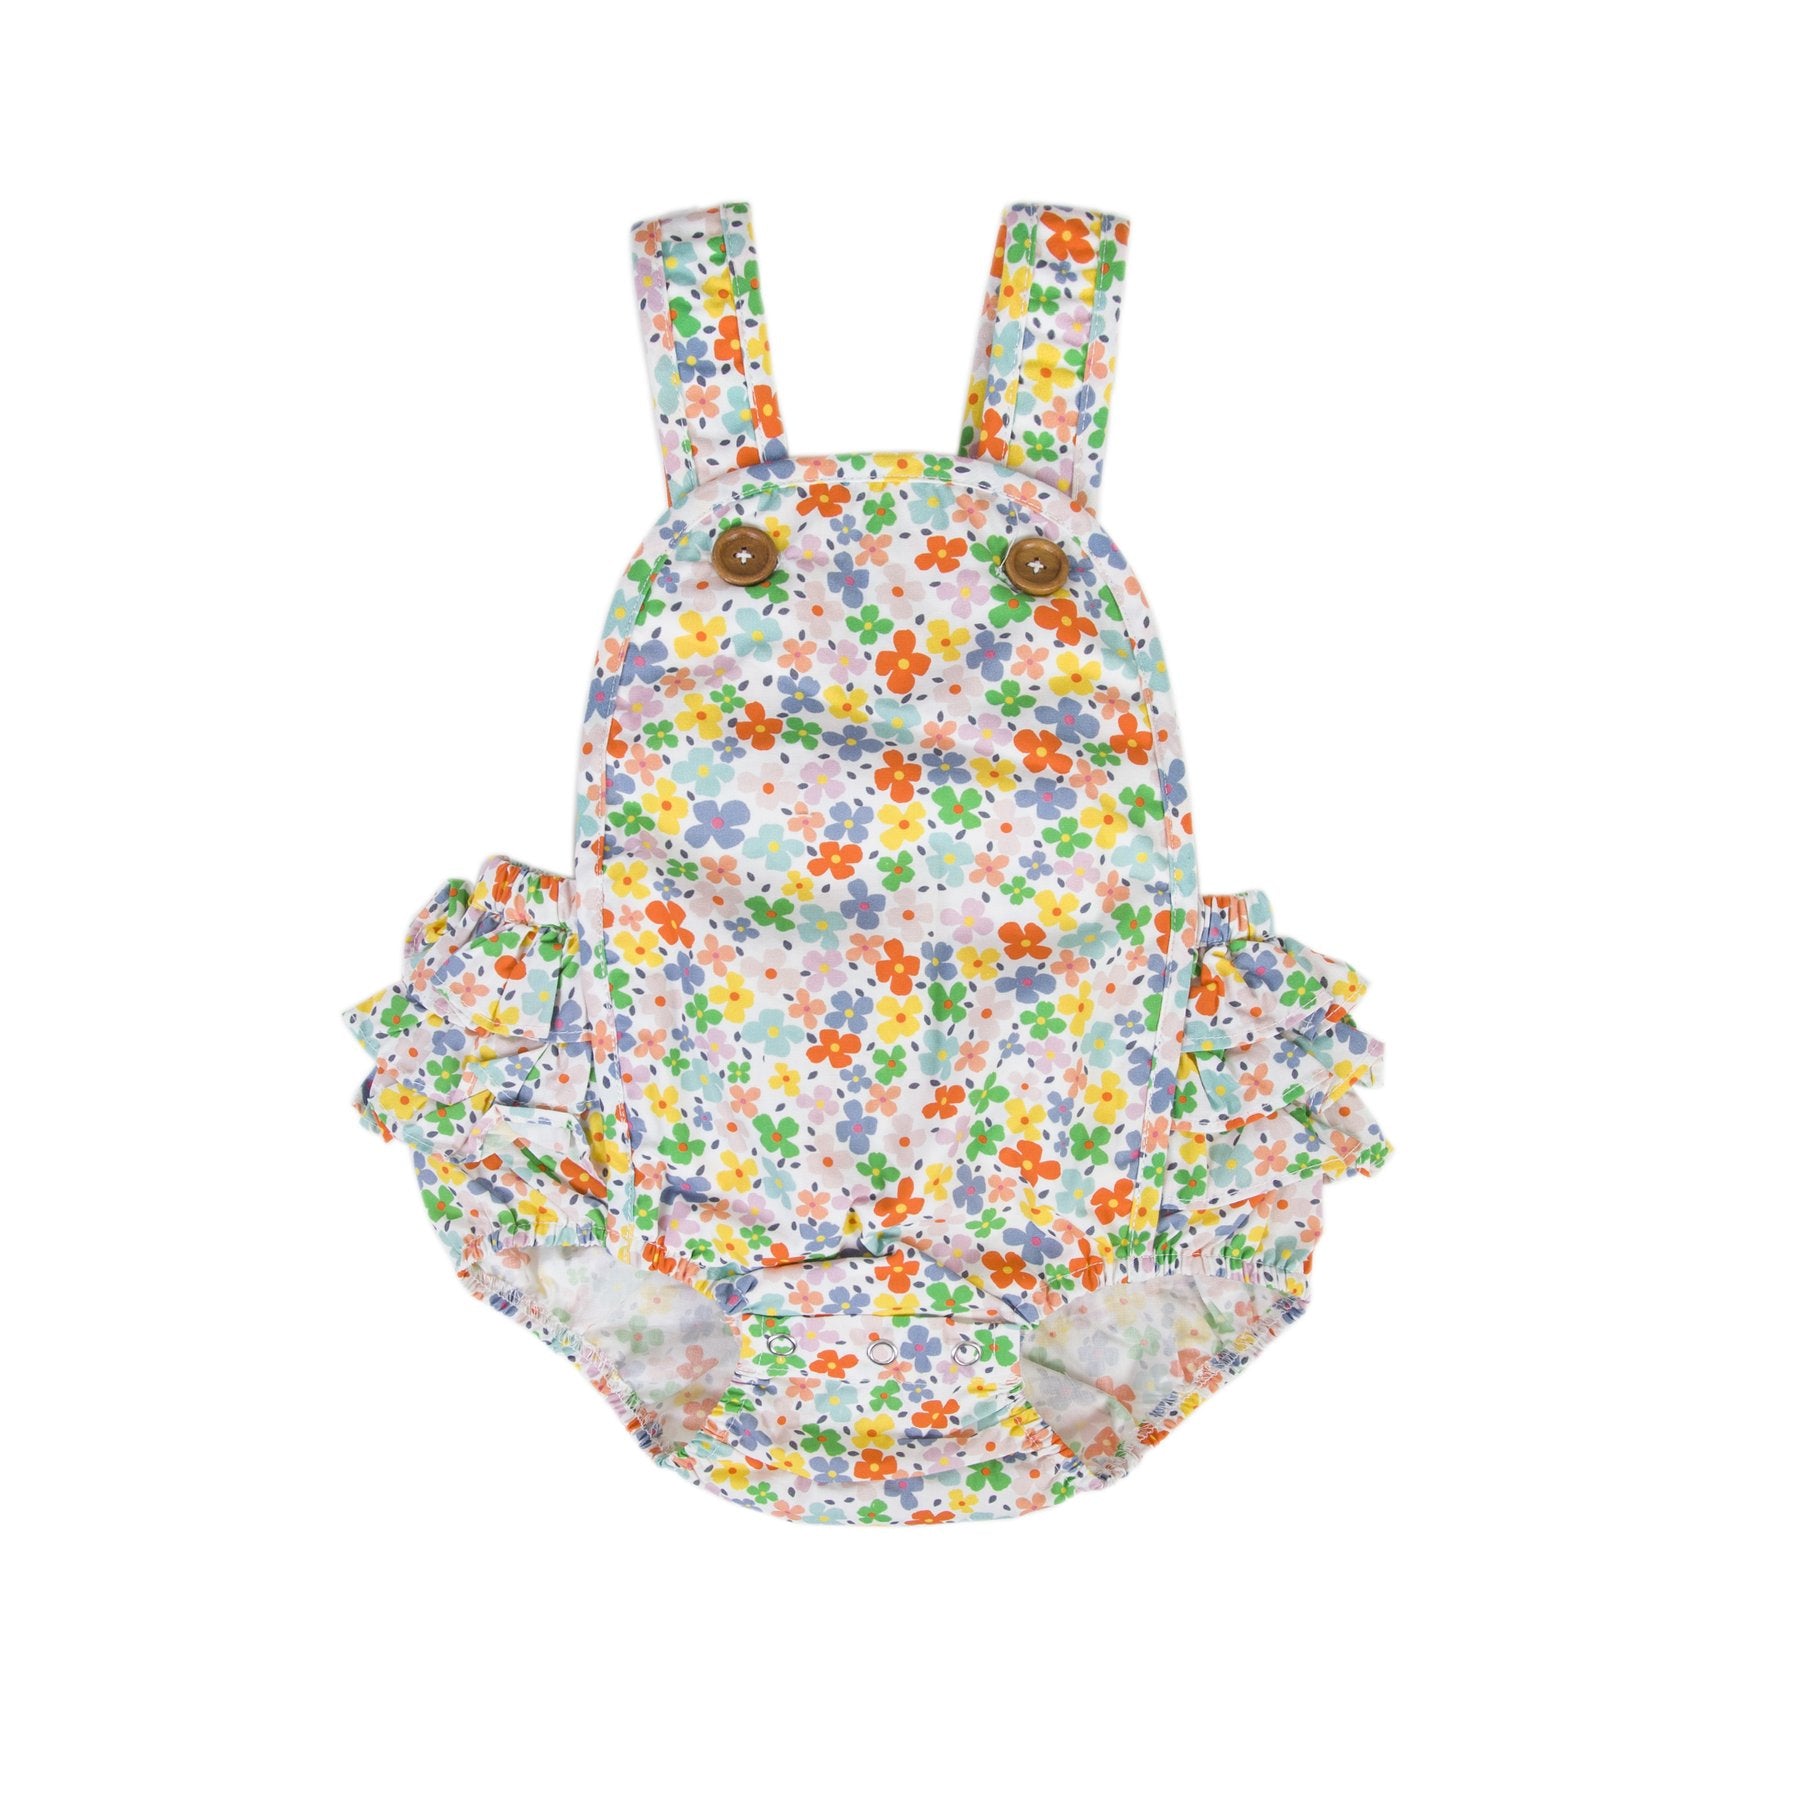 Peggy - Jane Playsuit - Multi Bright Floral